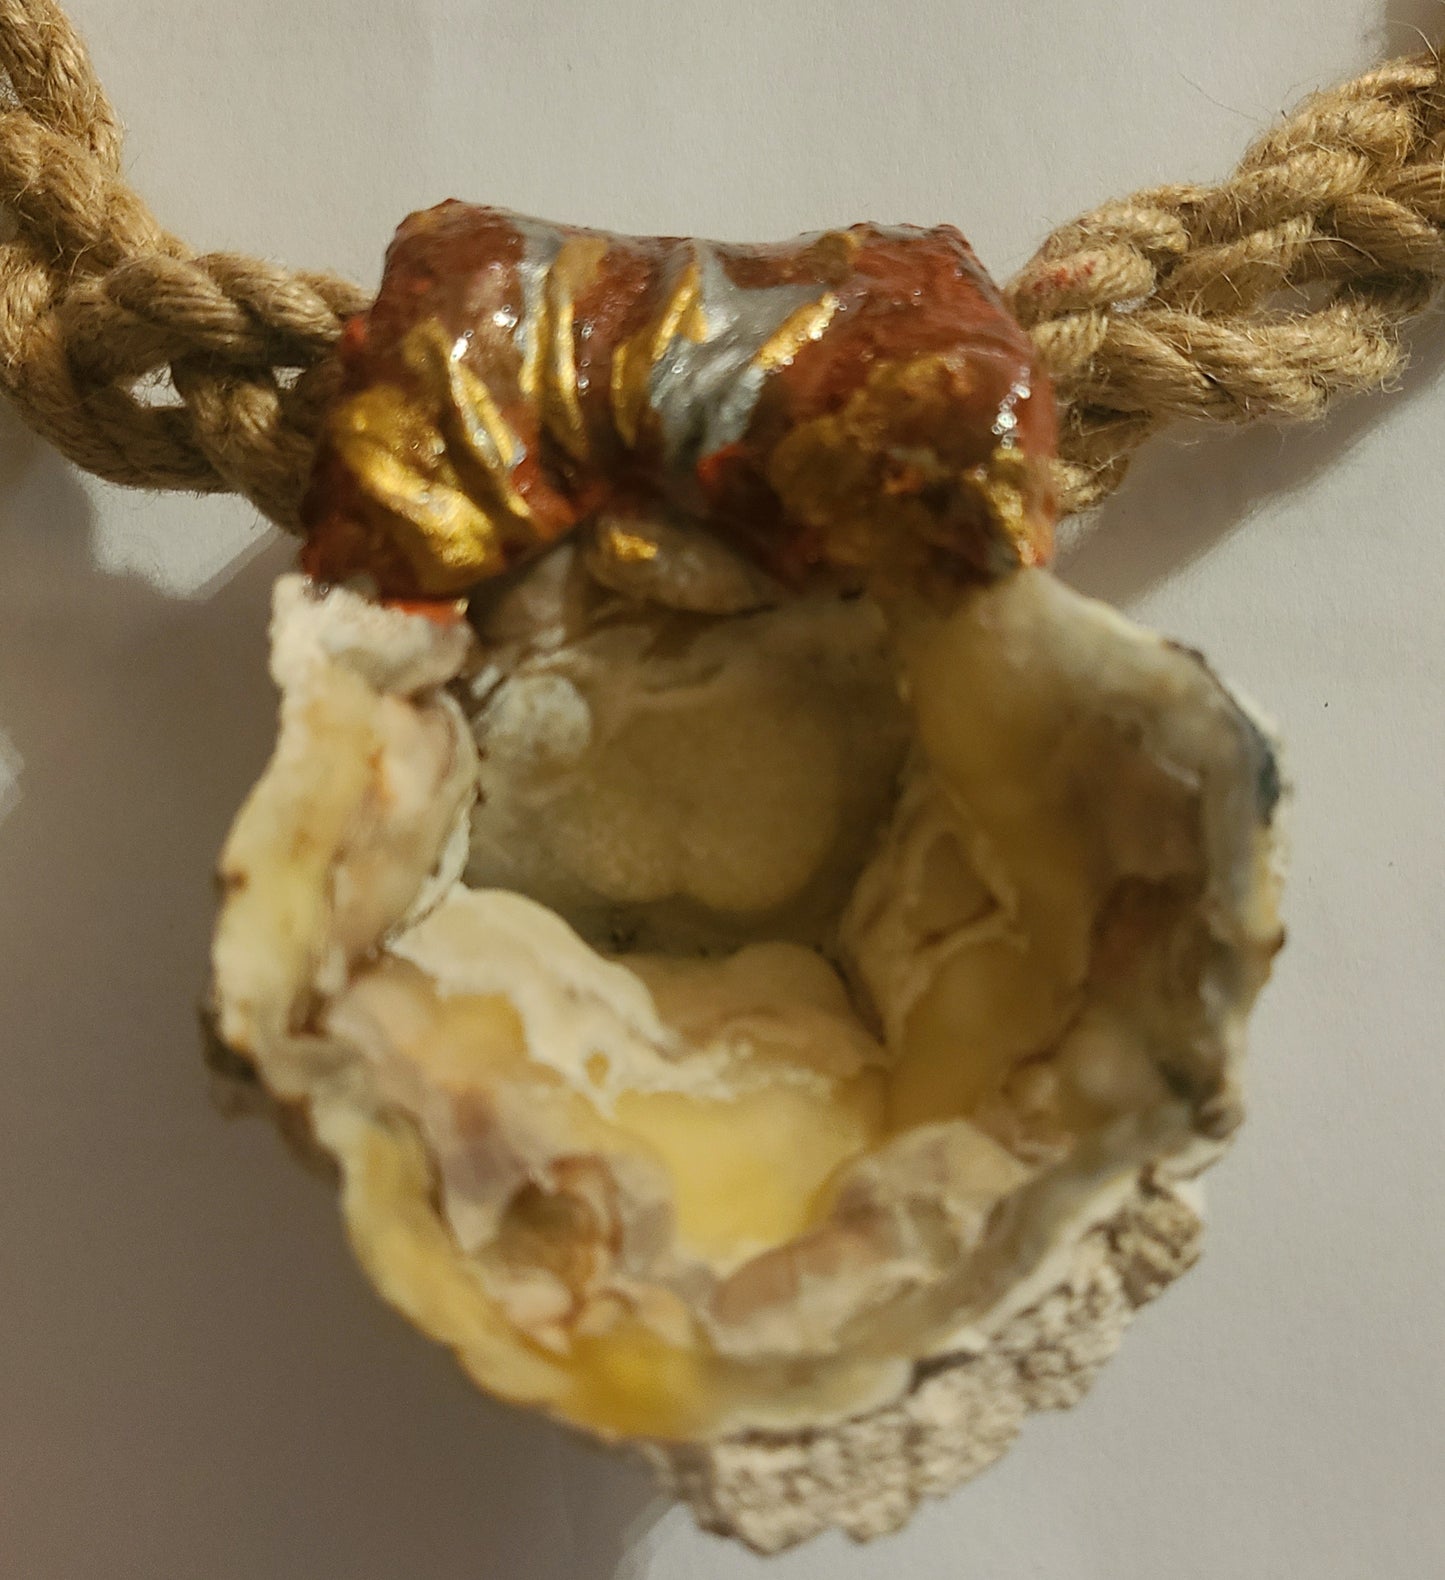 Rustic Sculpted Geode Unisex Statement Pendant With Braided Hemp Rope, Jeans Jewelry, Men's Bohemian Couture Talisman, Masculine Crystal Cave Amulet